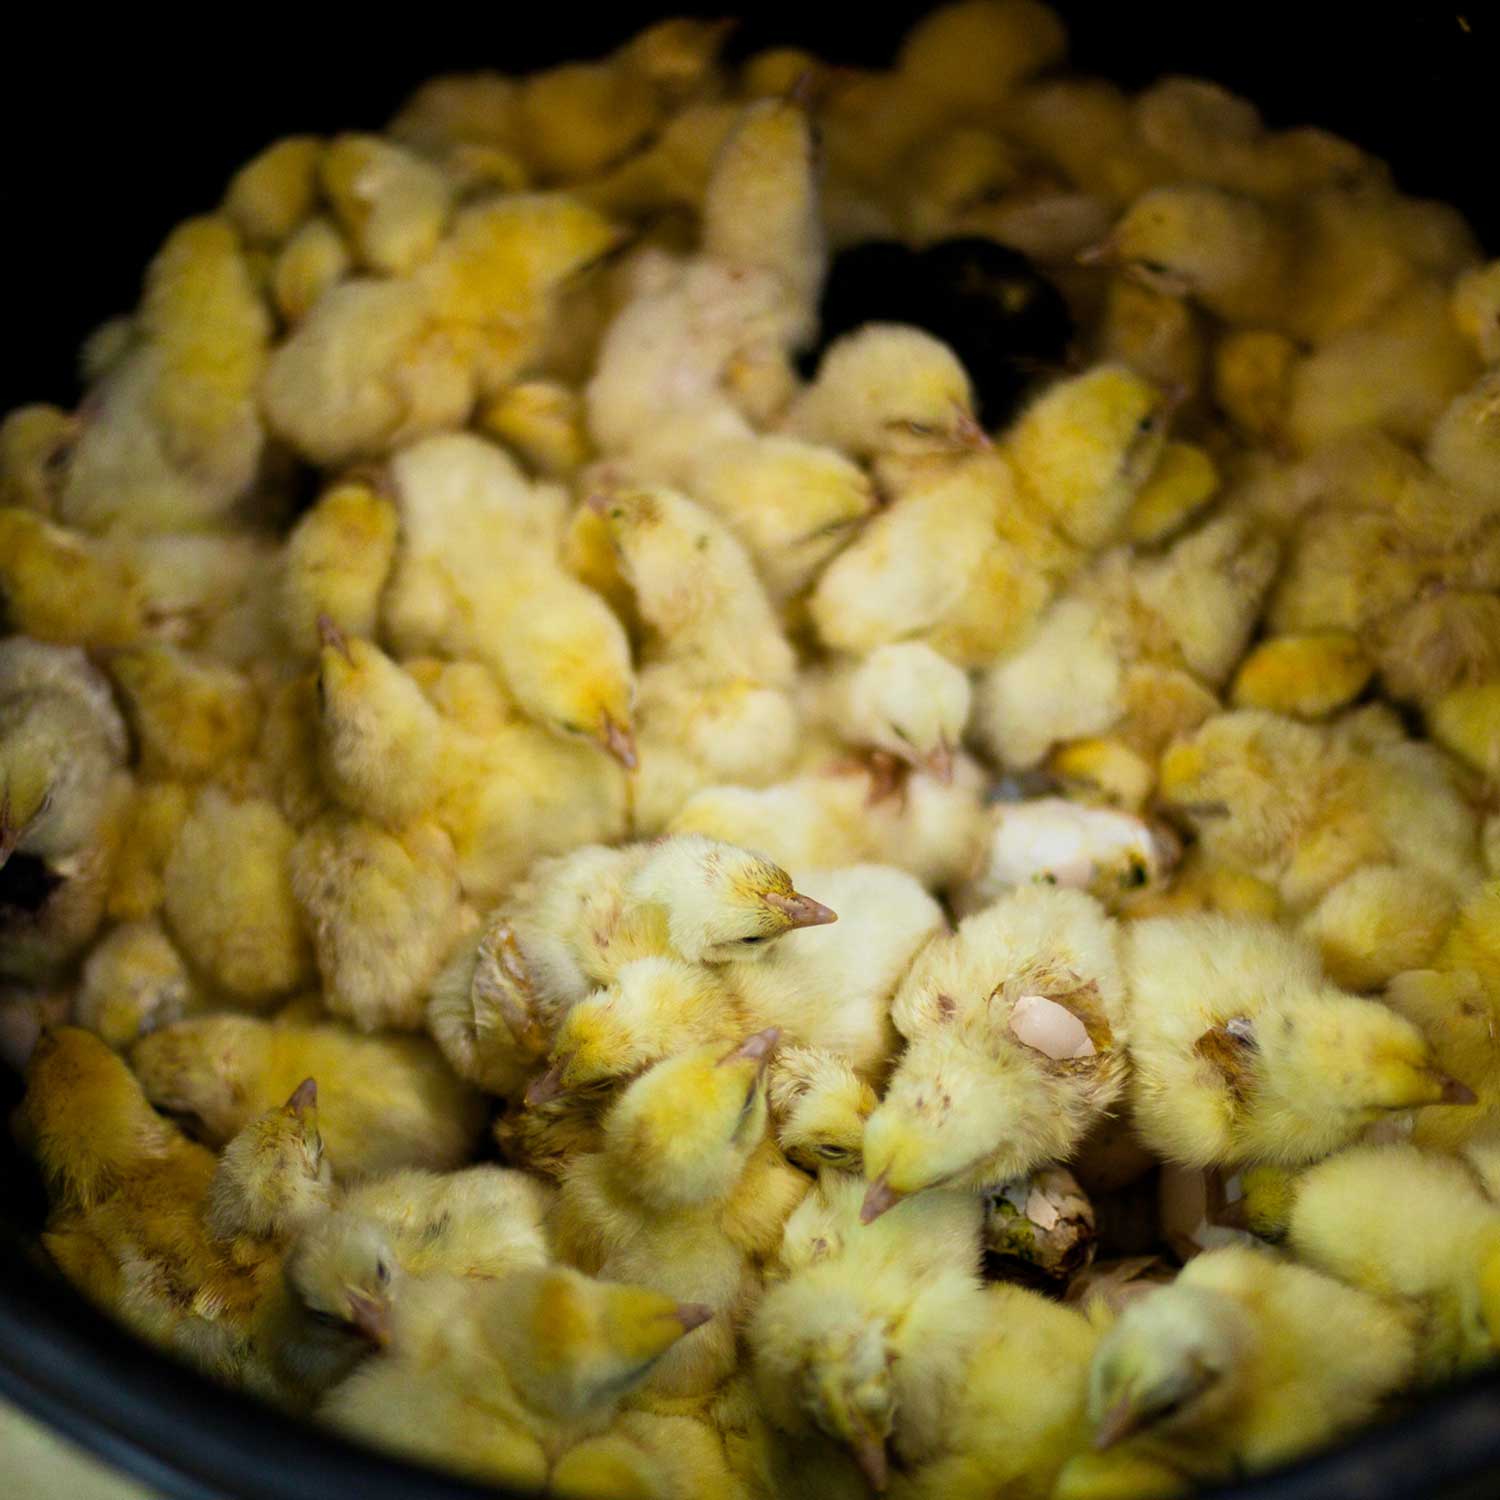 baby chicks in bucket for slaughter